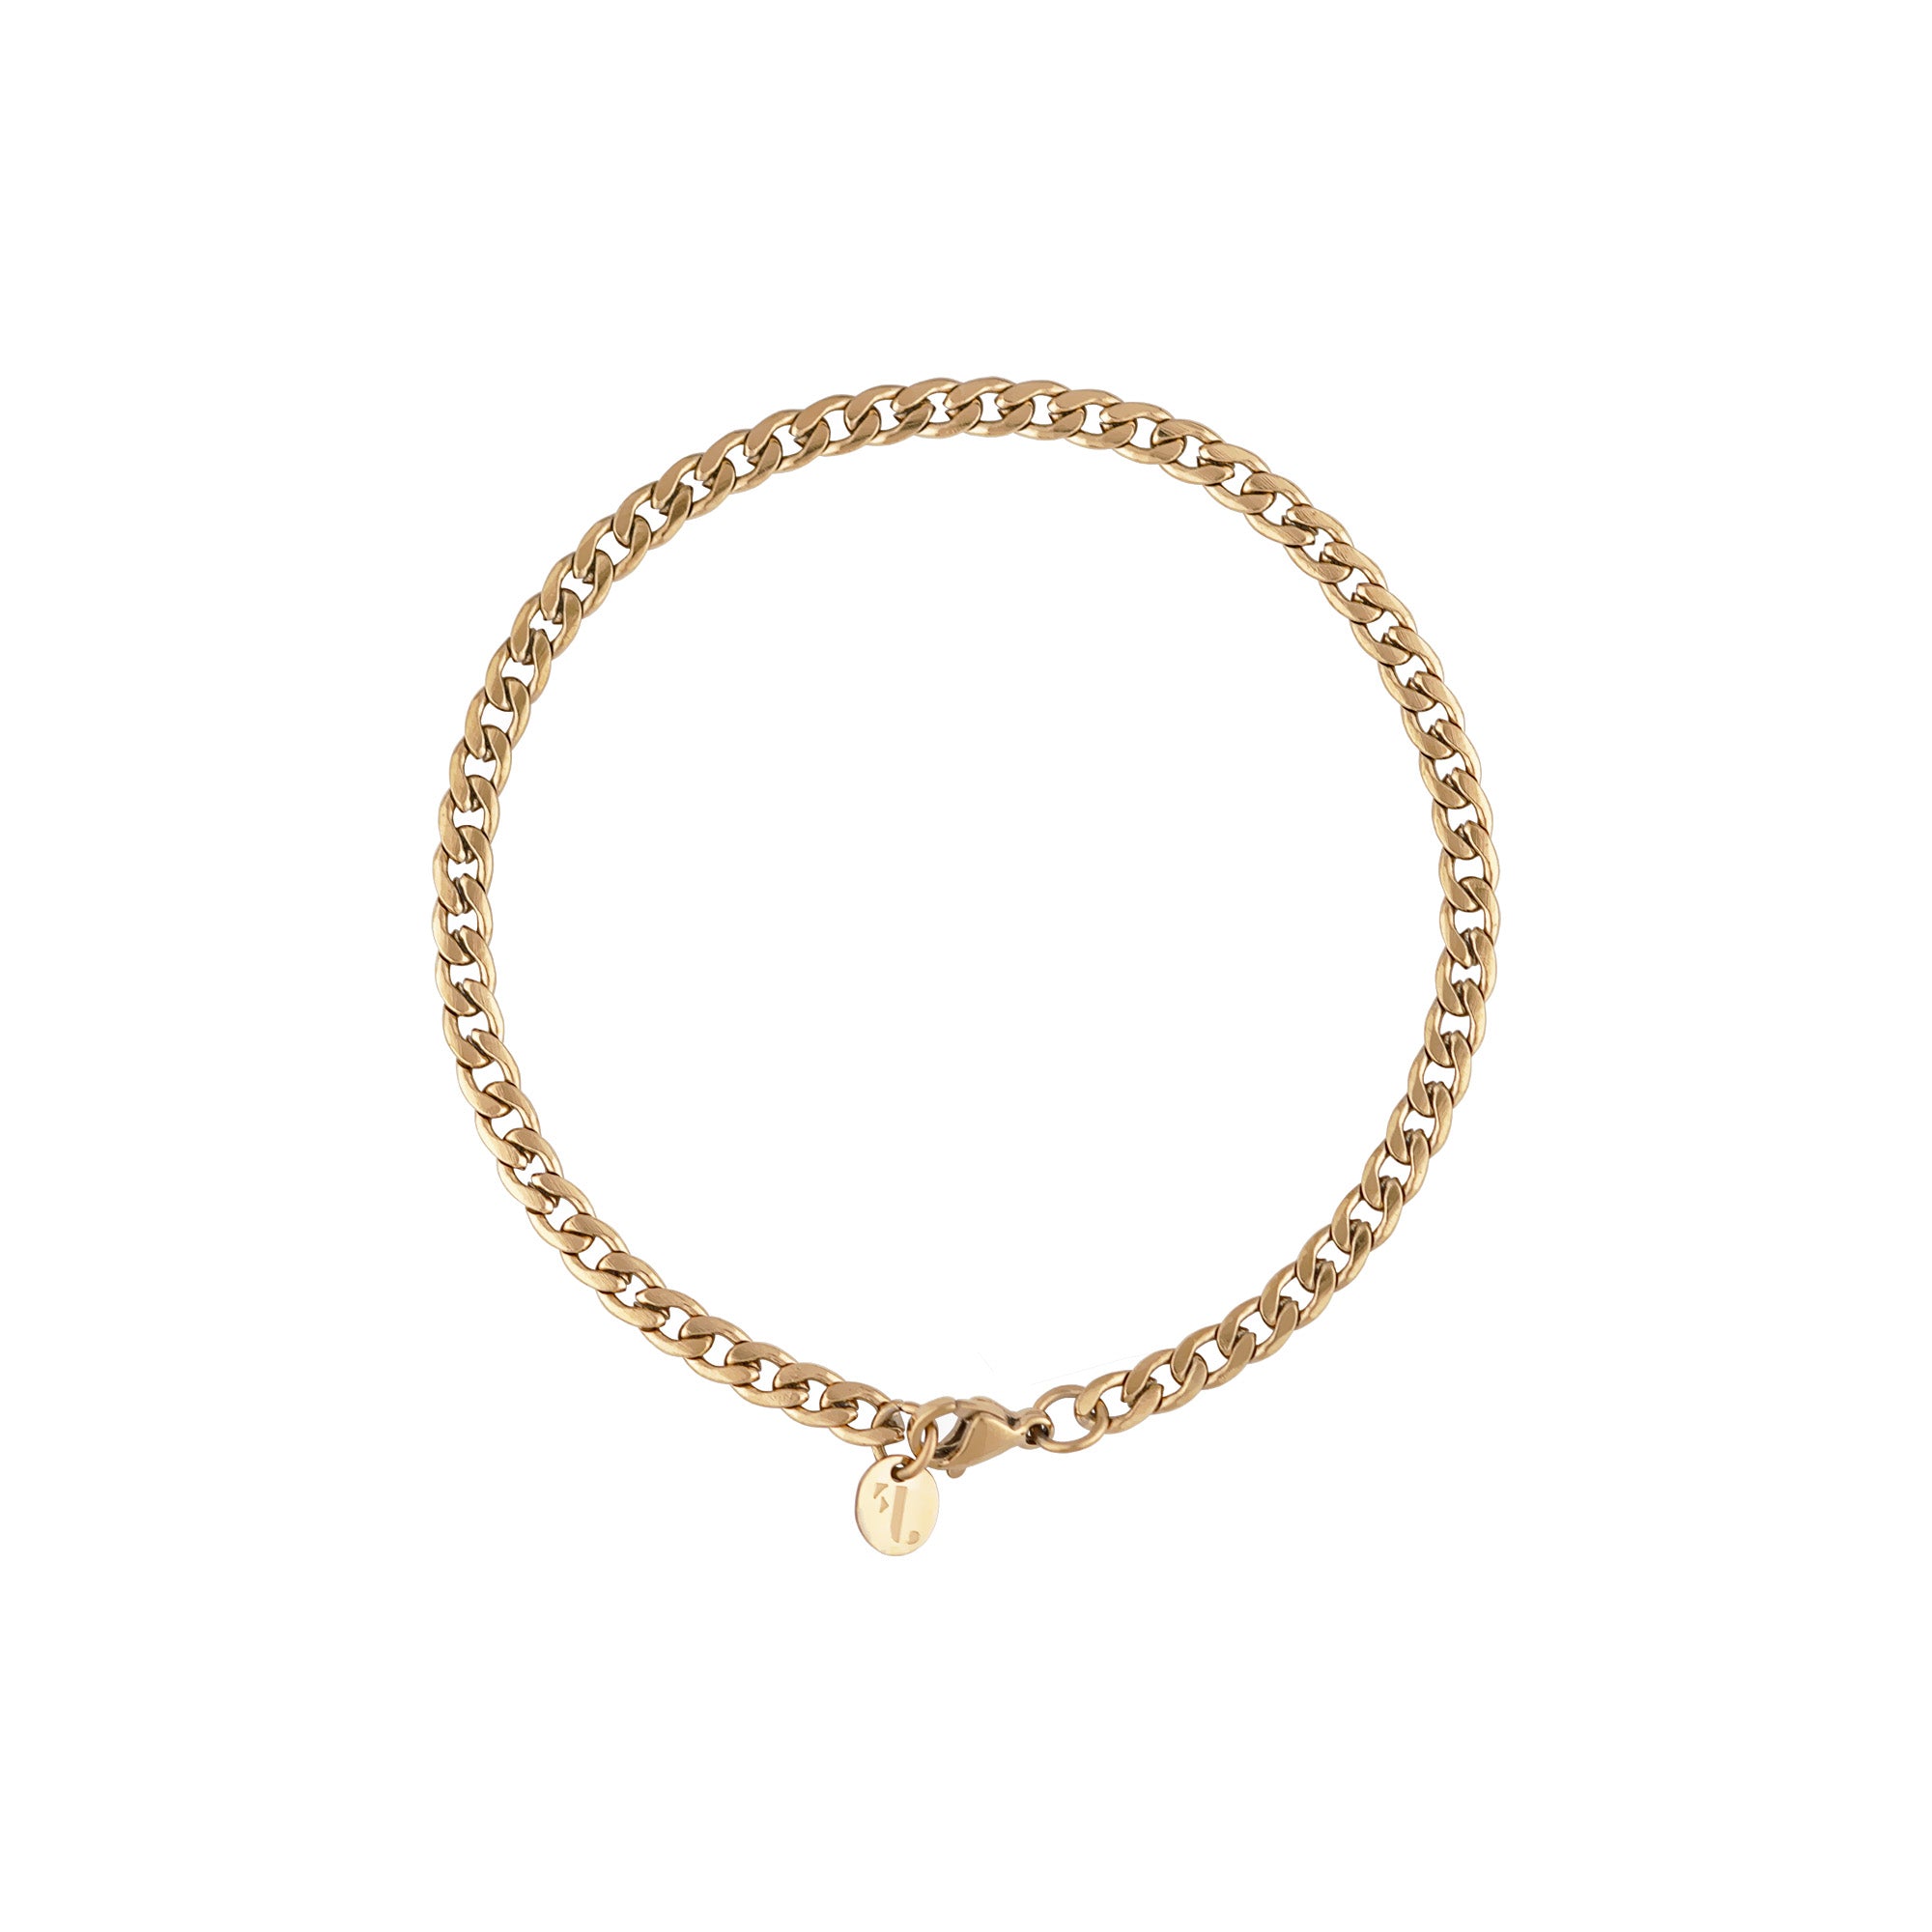 Mirik men's bracelet by Five Jwlry, designed with a 4mm flat wide woven Cuban link chain in a gold hue, made from water-resistant 316L stainless steel. Offered in sizes 20cm and 22cm. Hypoallergenic and backed by a 2-year warranty.